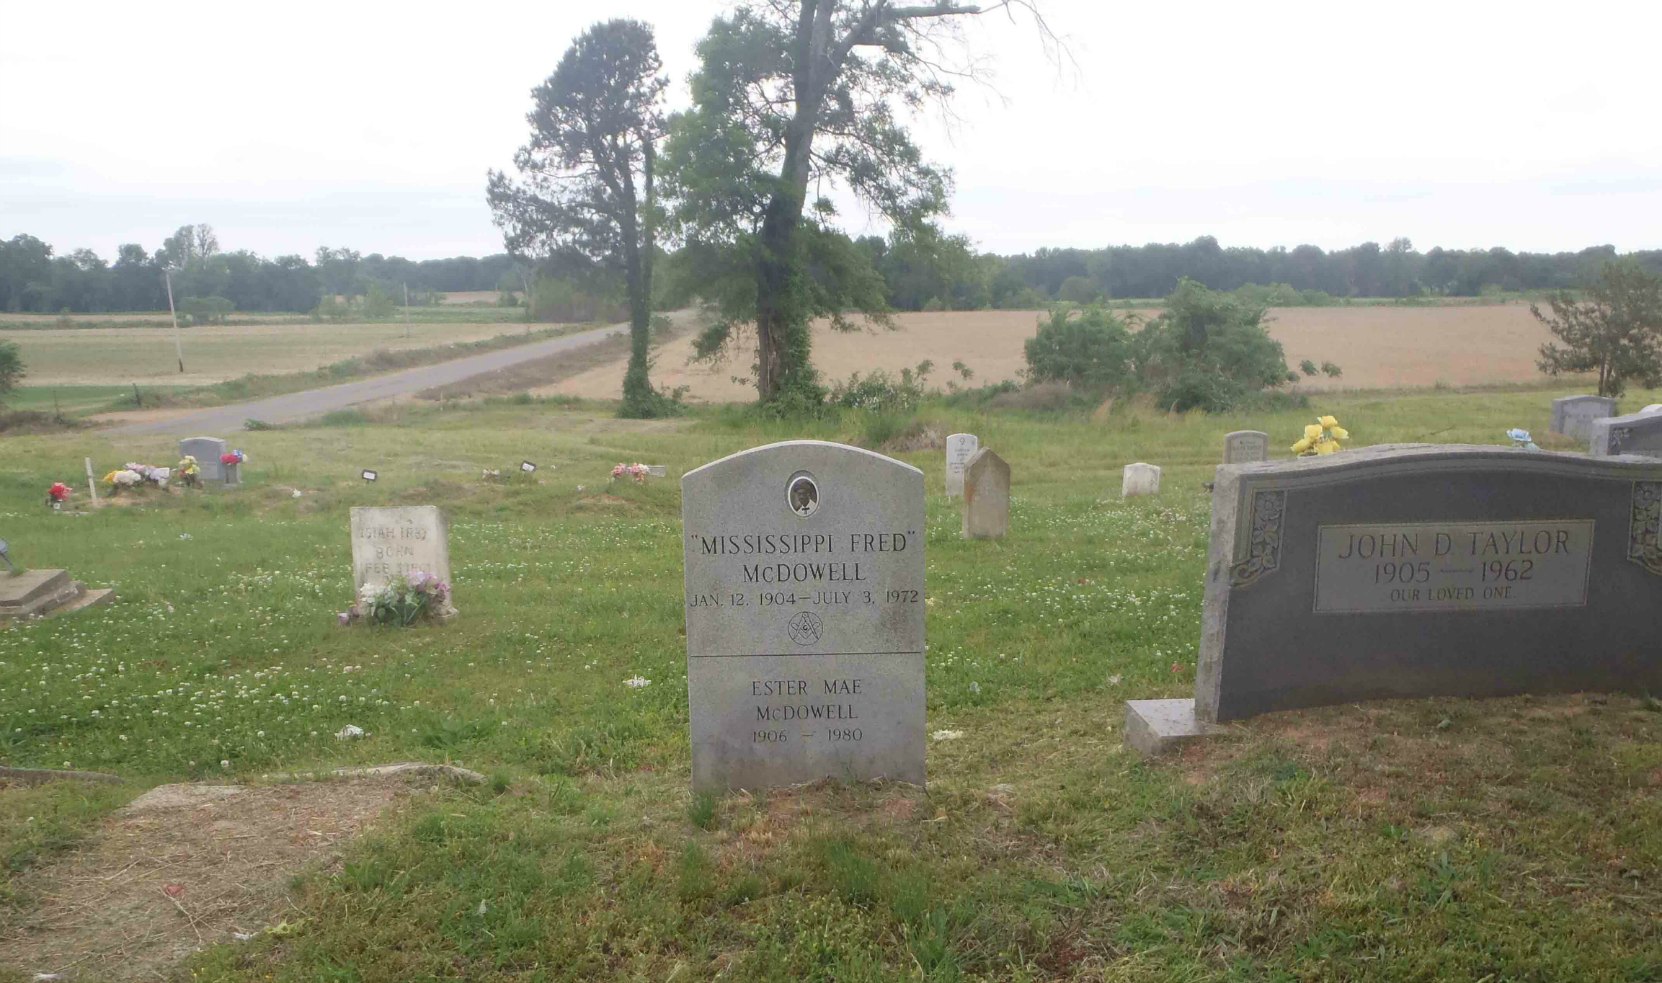 Mississippi Fred McDowell's grave, near Como, Panola County, Mississippi